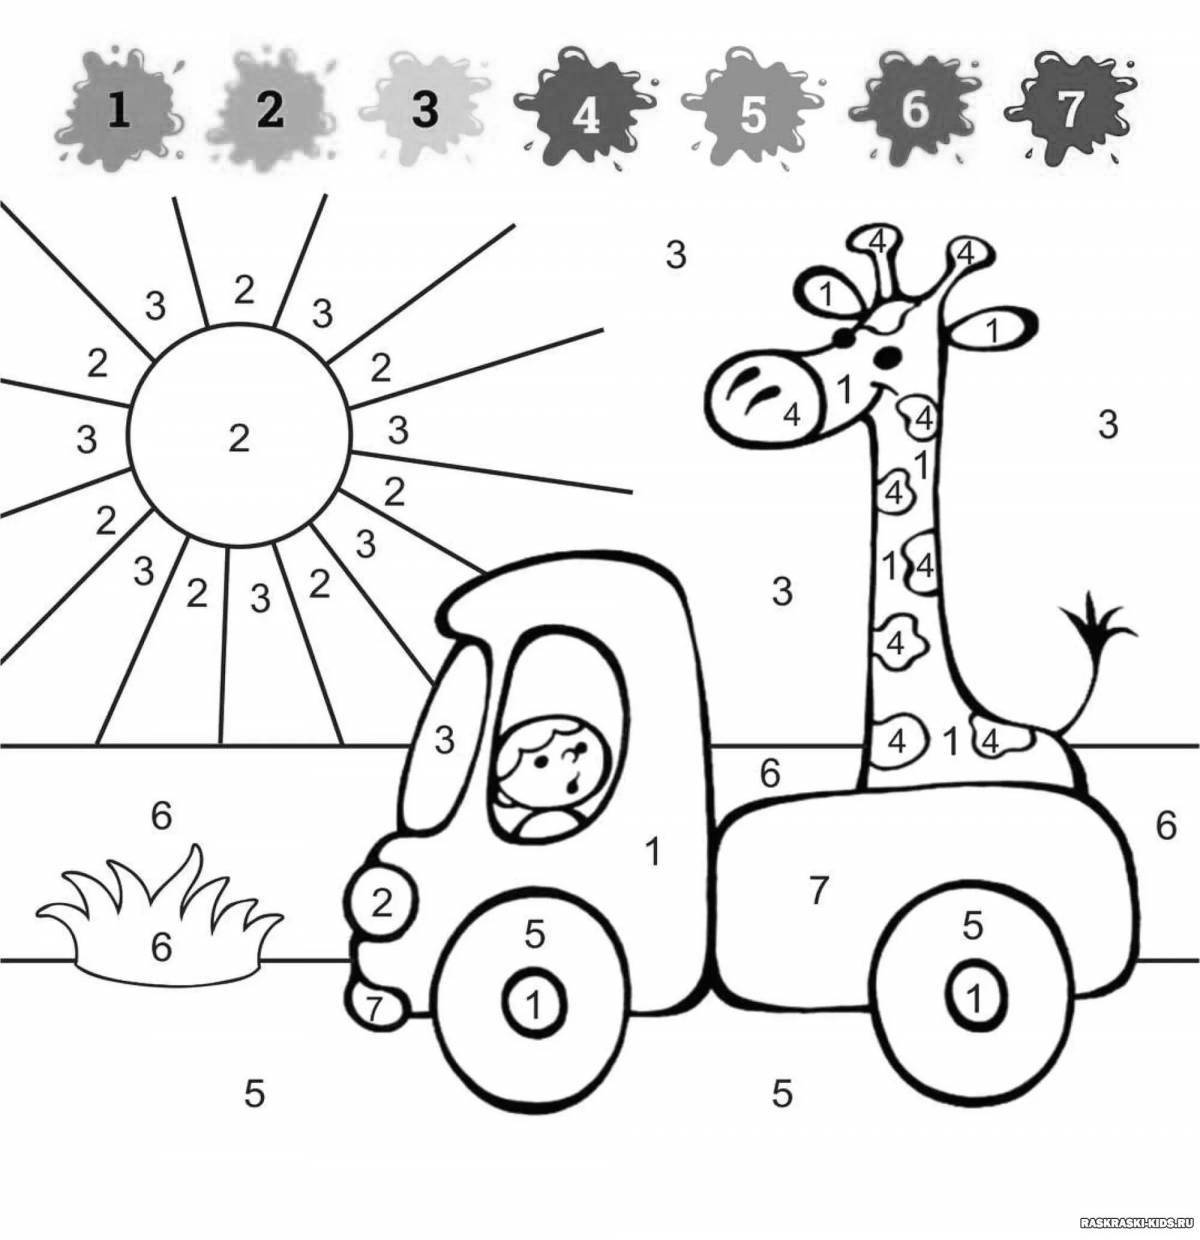 Coloring game sweet cars for boys 3-4 years old